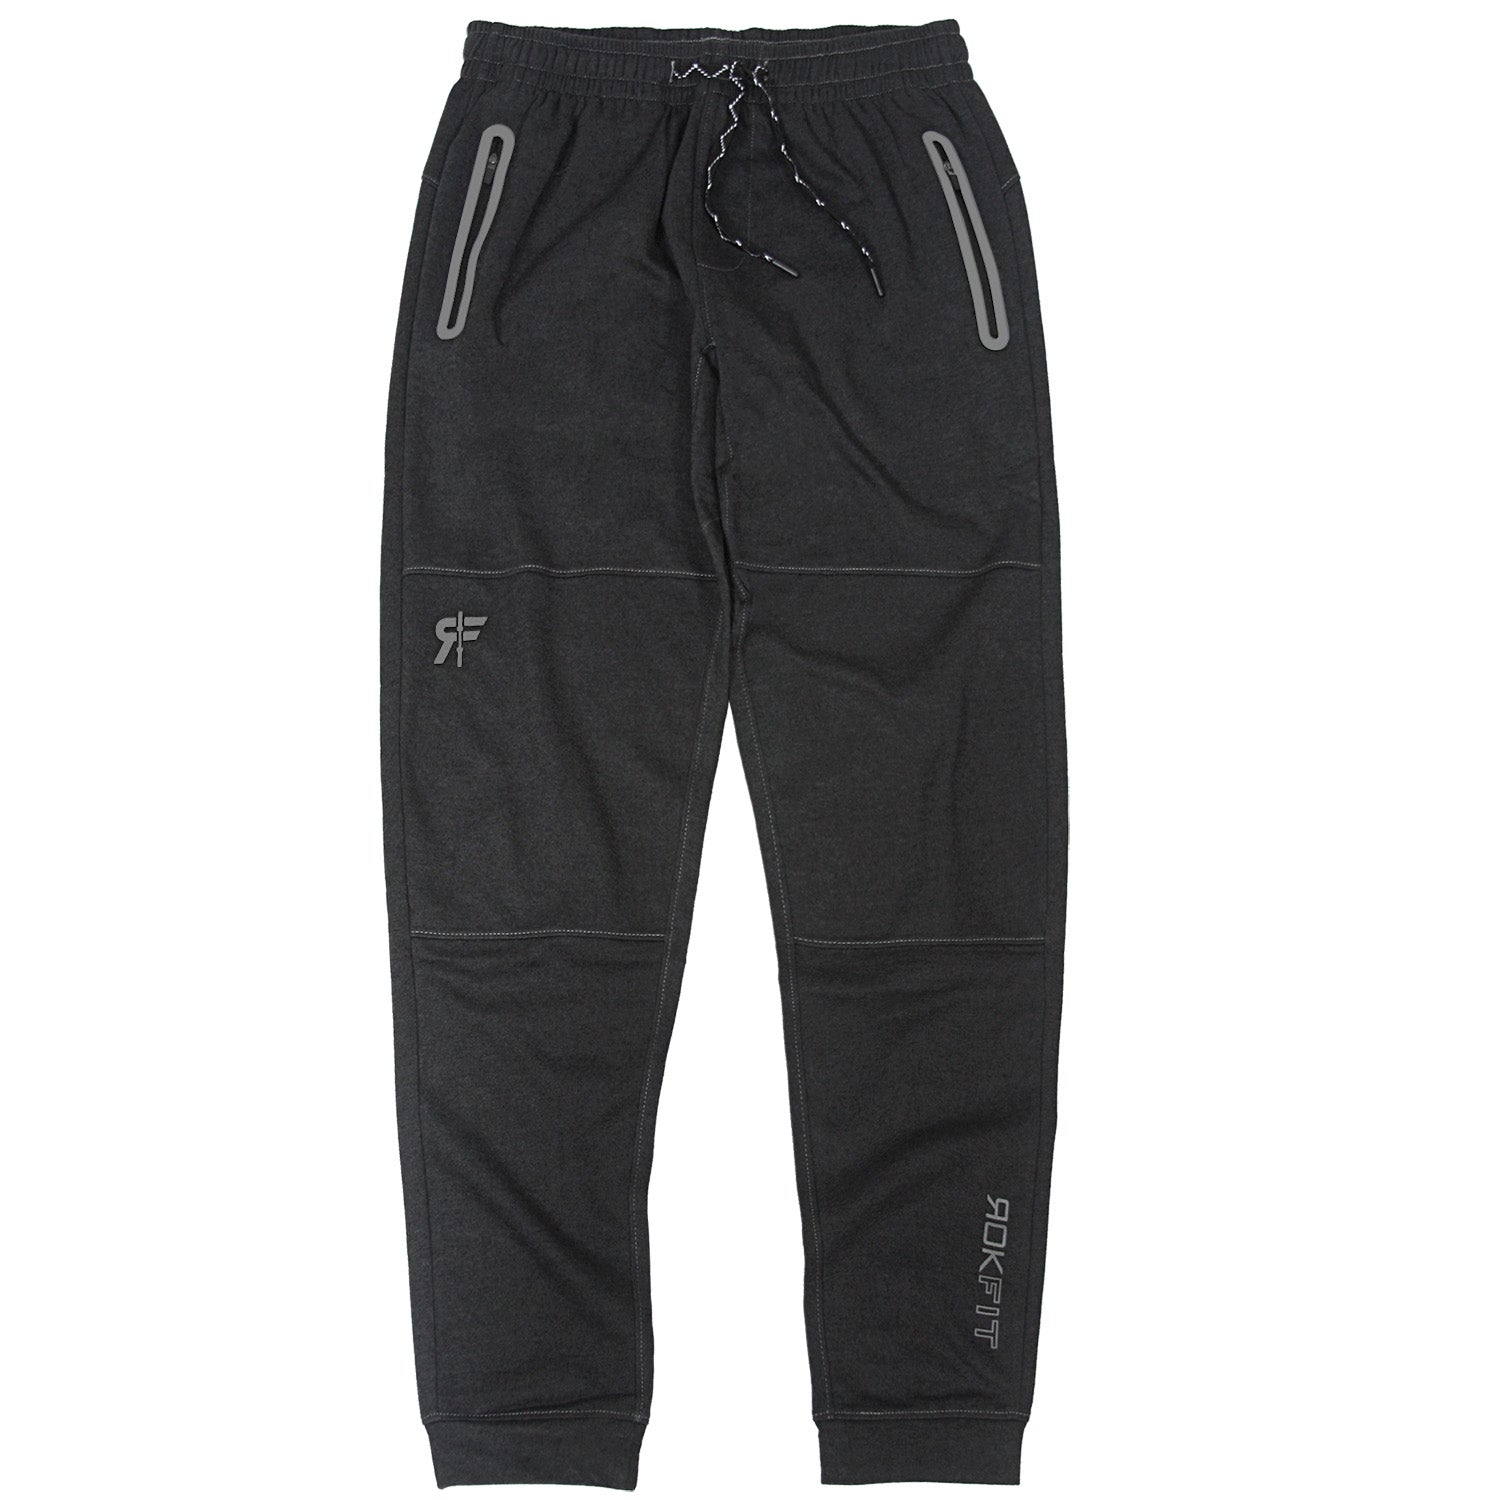 MOTION' Joggers - by RokFit